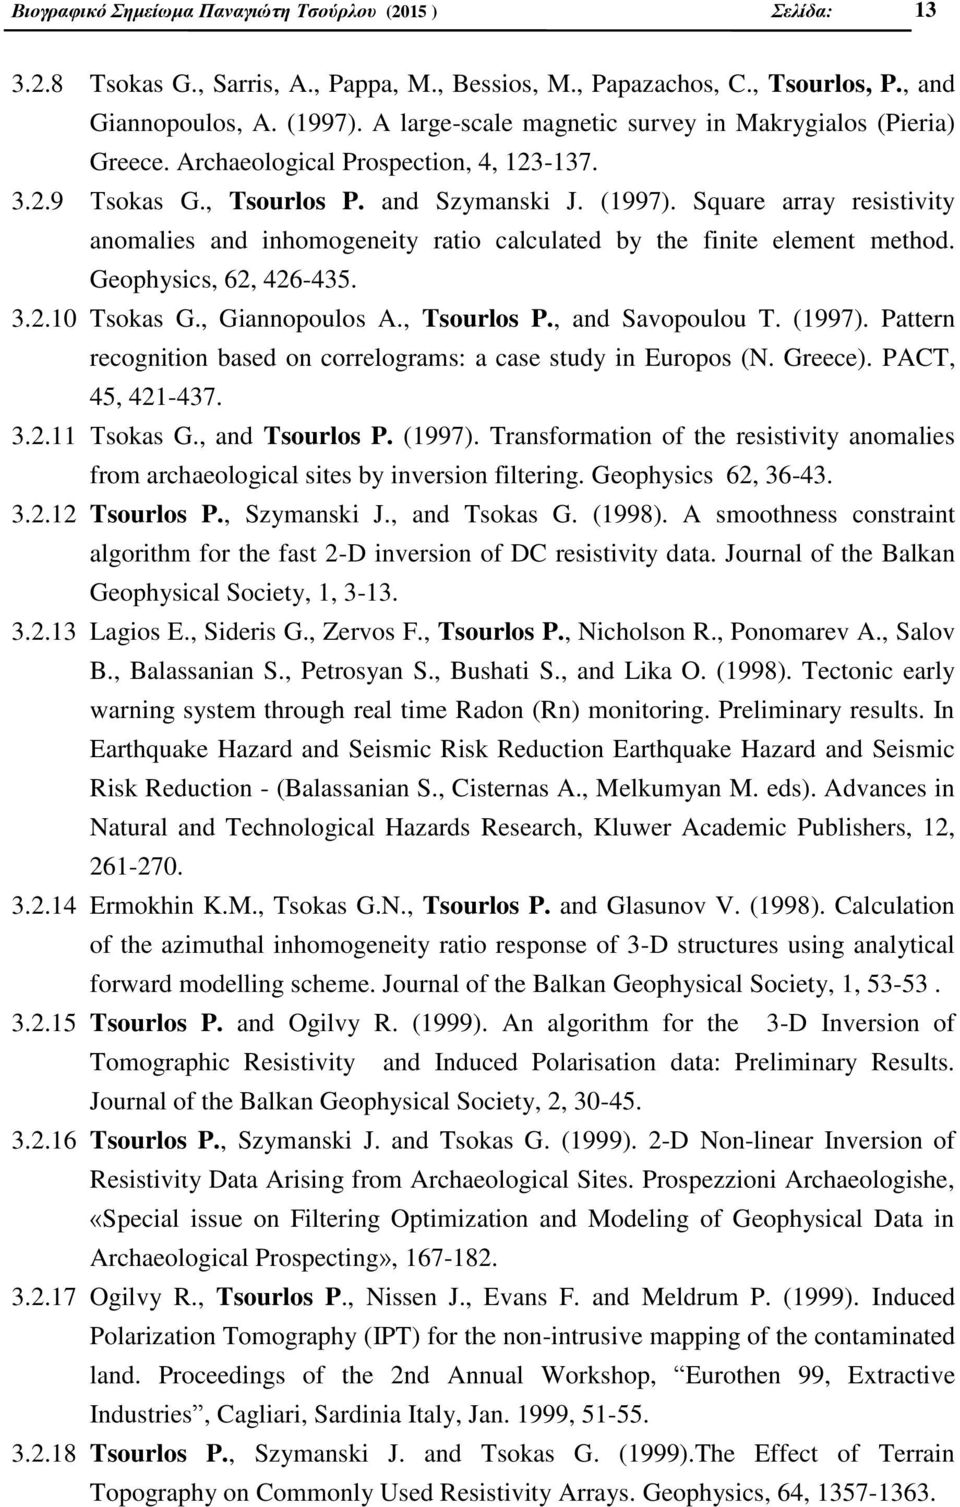 Square array resistivity anomalies and inhomogeneity ratio calculated by the finite element method. Geophysics, 62, 426-435. 3.2.10 Tsokas G., Giannopoulos A., Tsourlos P., and Savopoulou T. (1997).